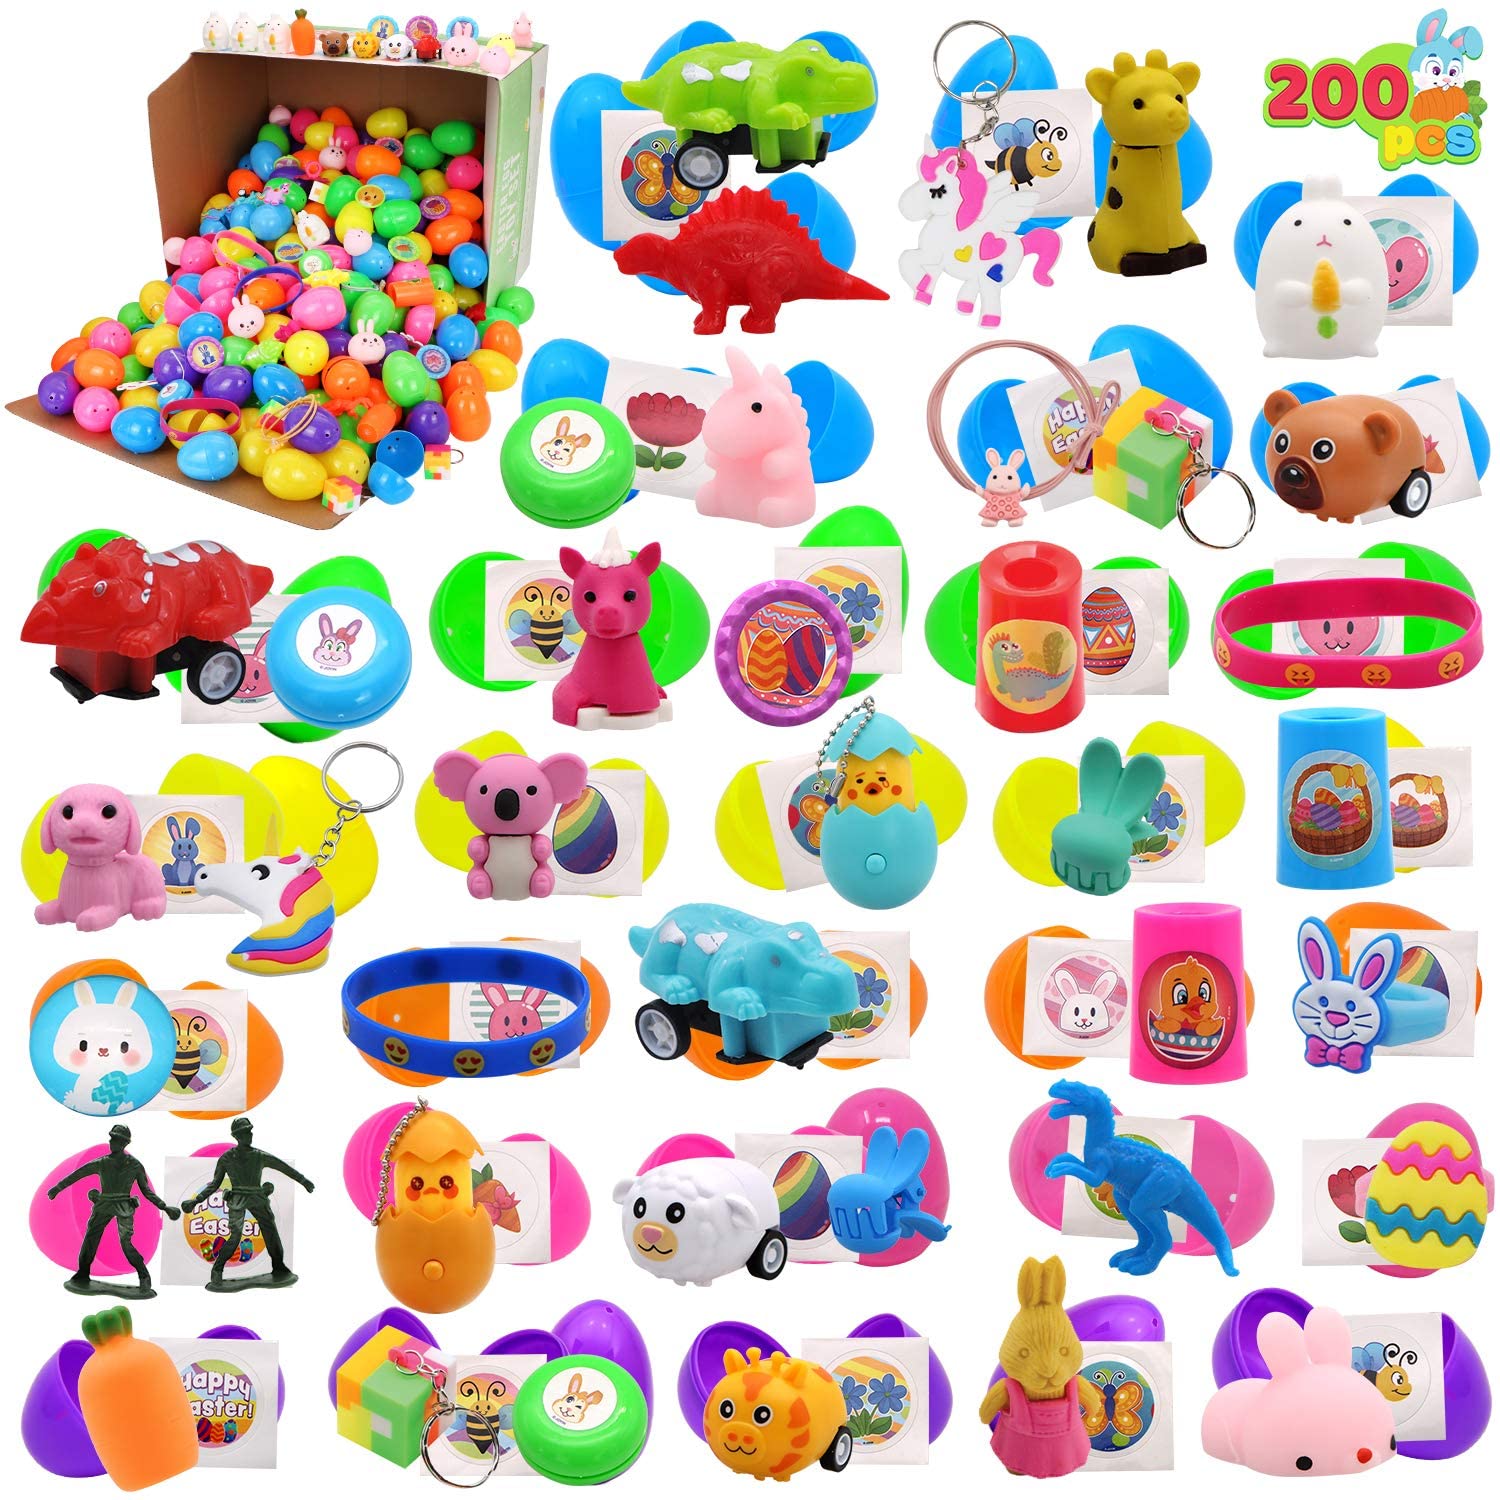 200 Pcs Prefilled Colorful Easter Eggs w/ Novelty Toys and Stickers